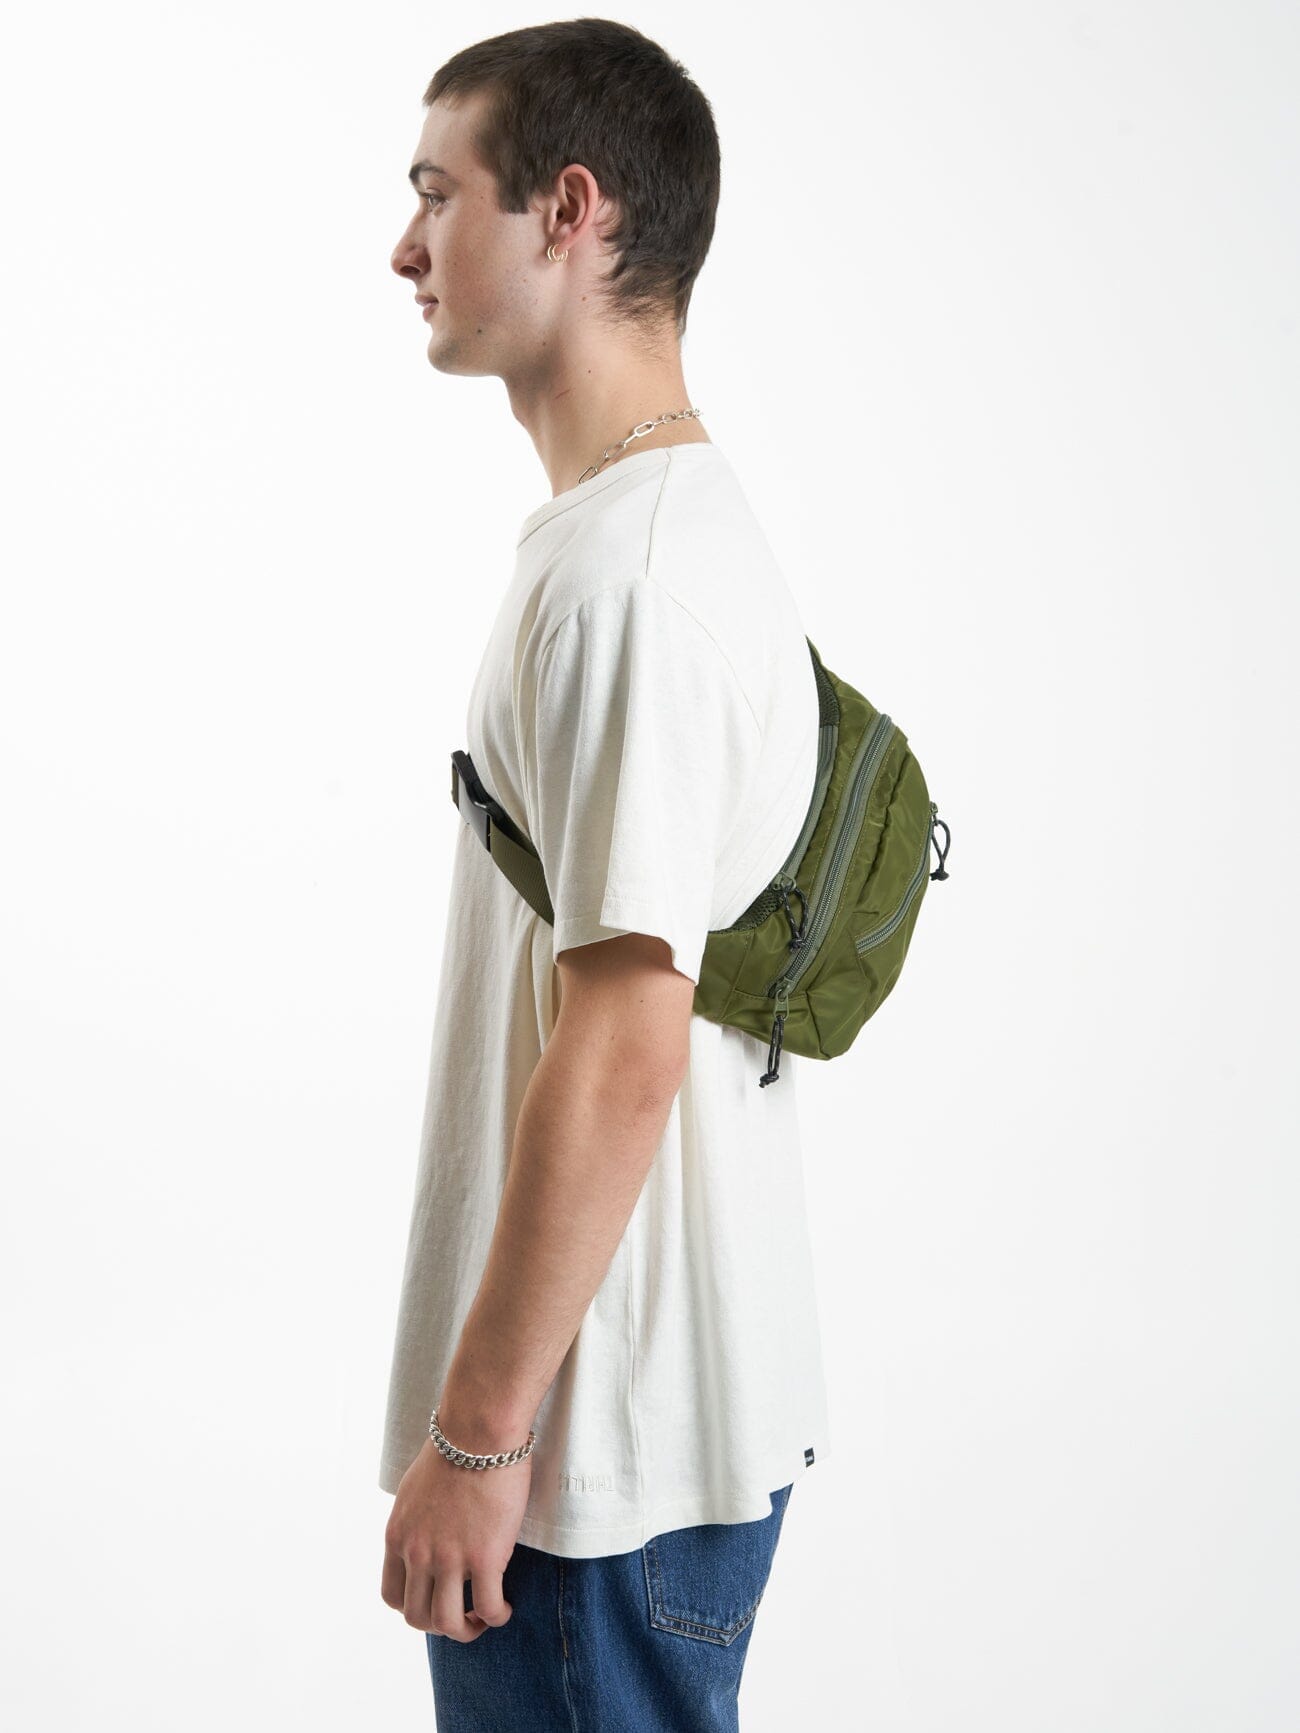 Issued Hip Bag - Mild Army